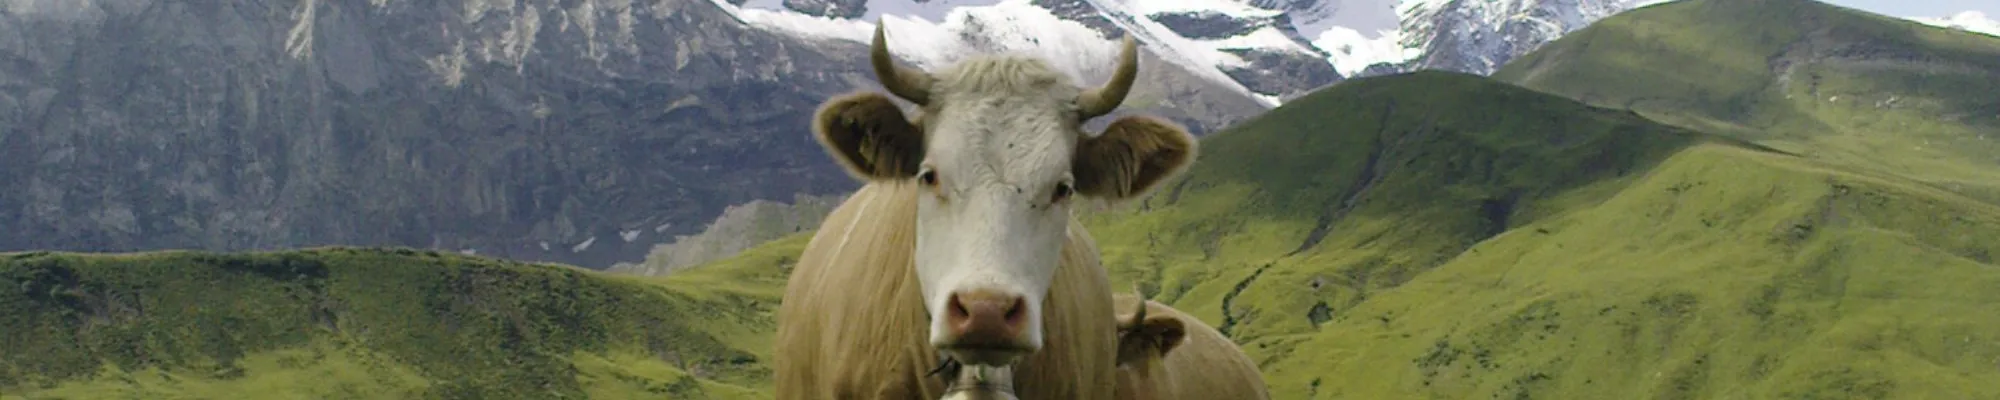 Cow stands in front of a scenic mountain backdrop - Animal Bio Check